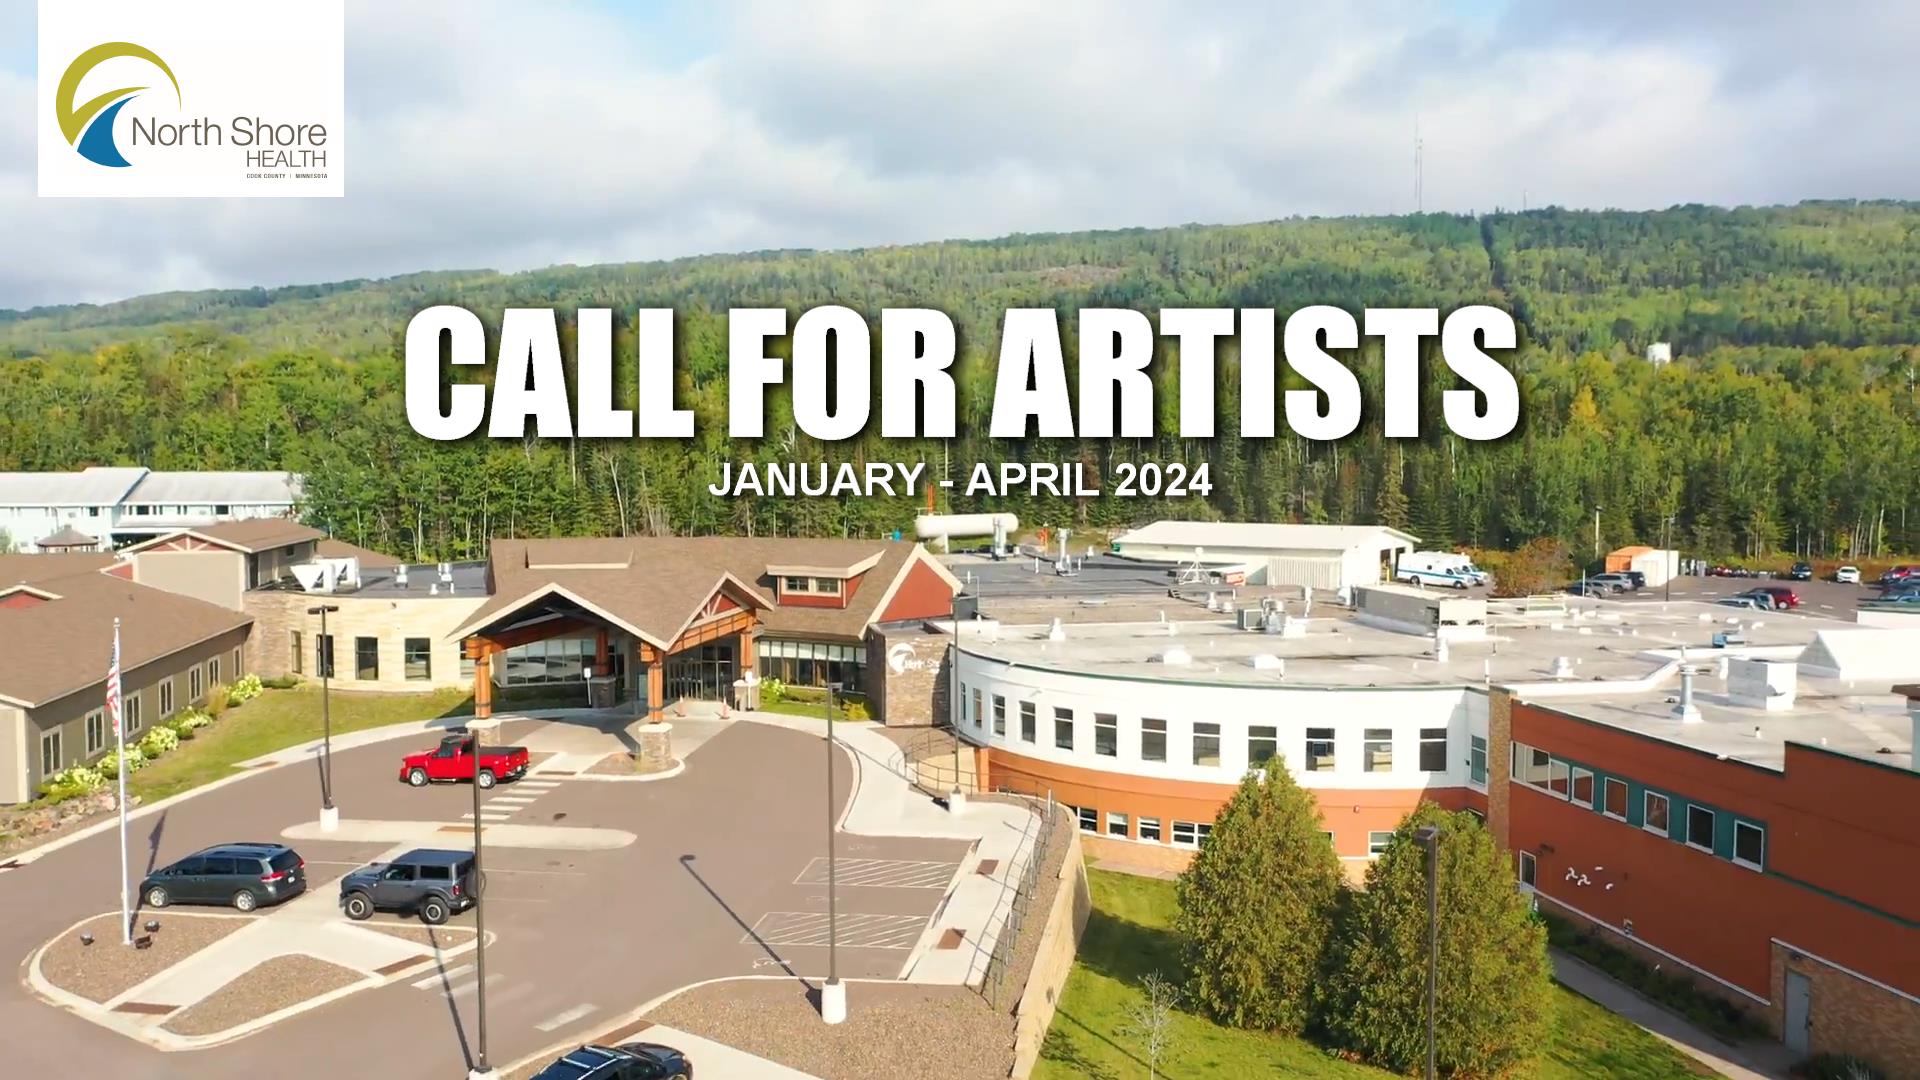 CALL FOR ARTISTS